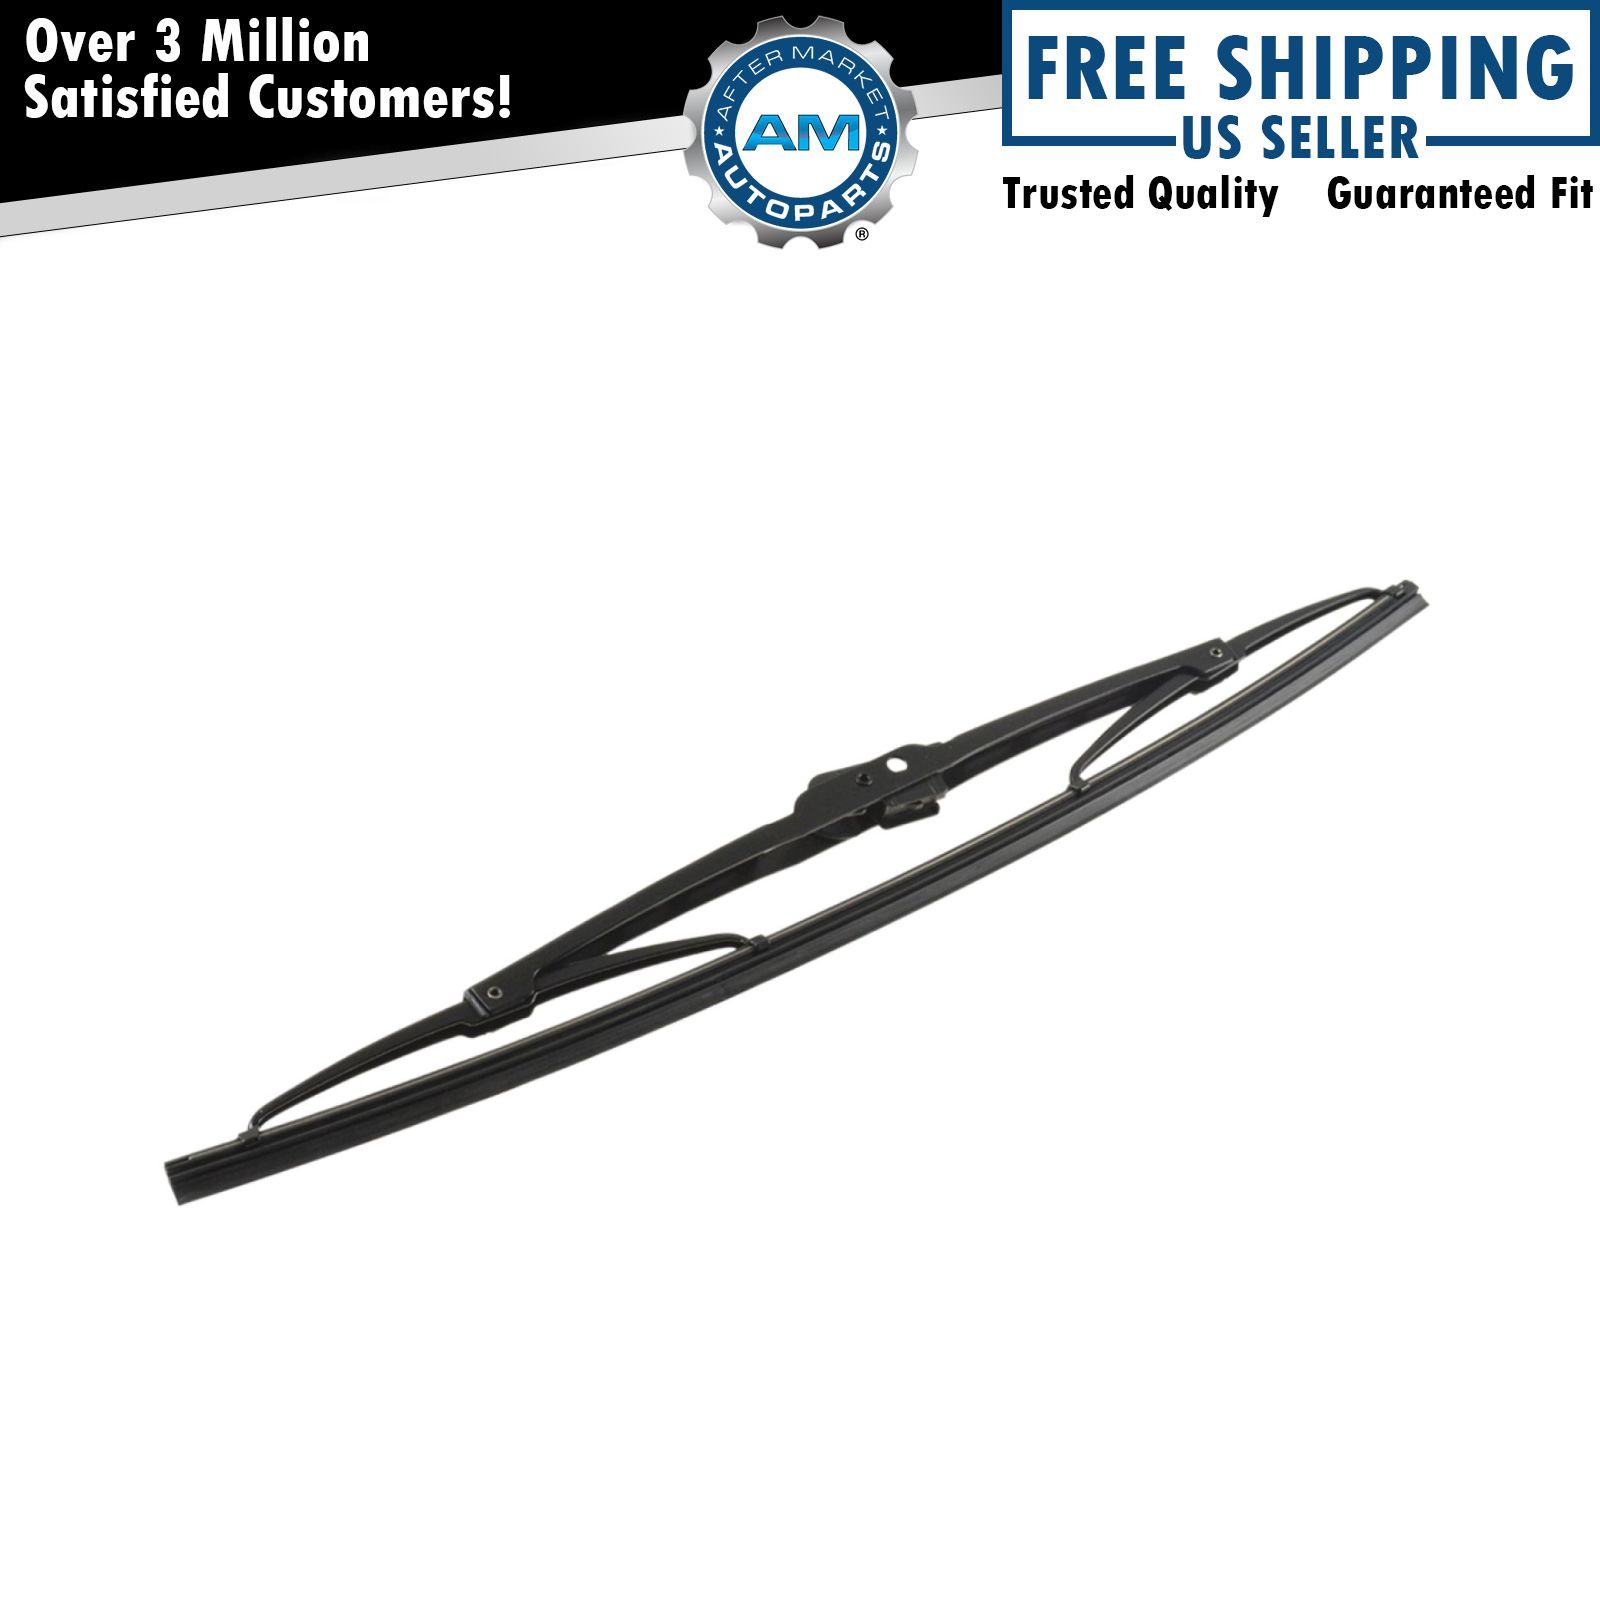 OEM Mopar 1AMWC016AA Wiper Blade 16" for Dodge Chrysler | eBay 2010 Chrysler Town And Country Wiper Blade Size